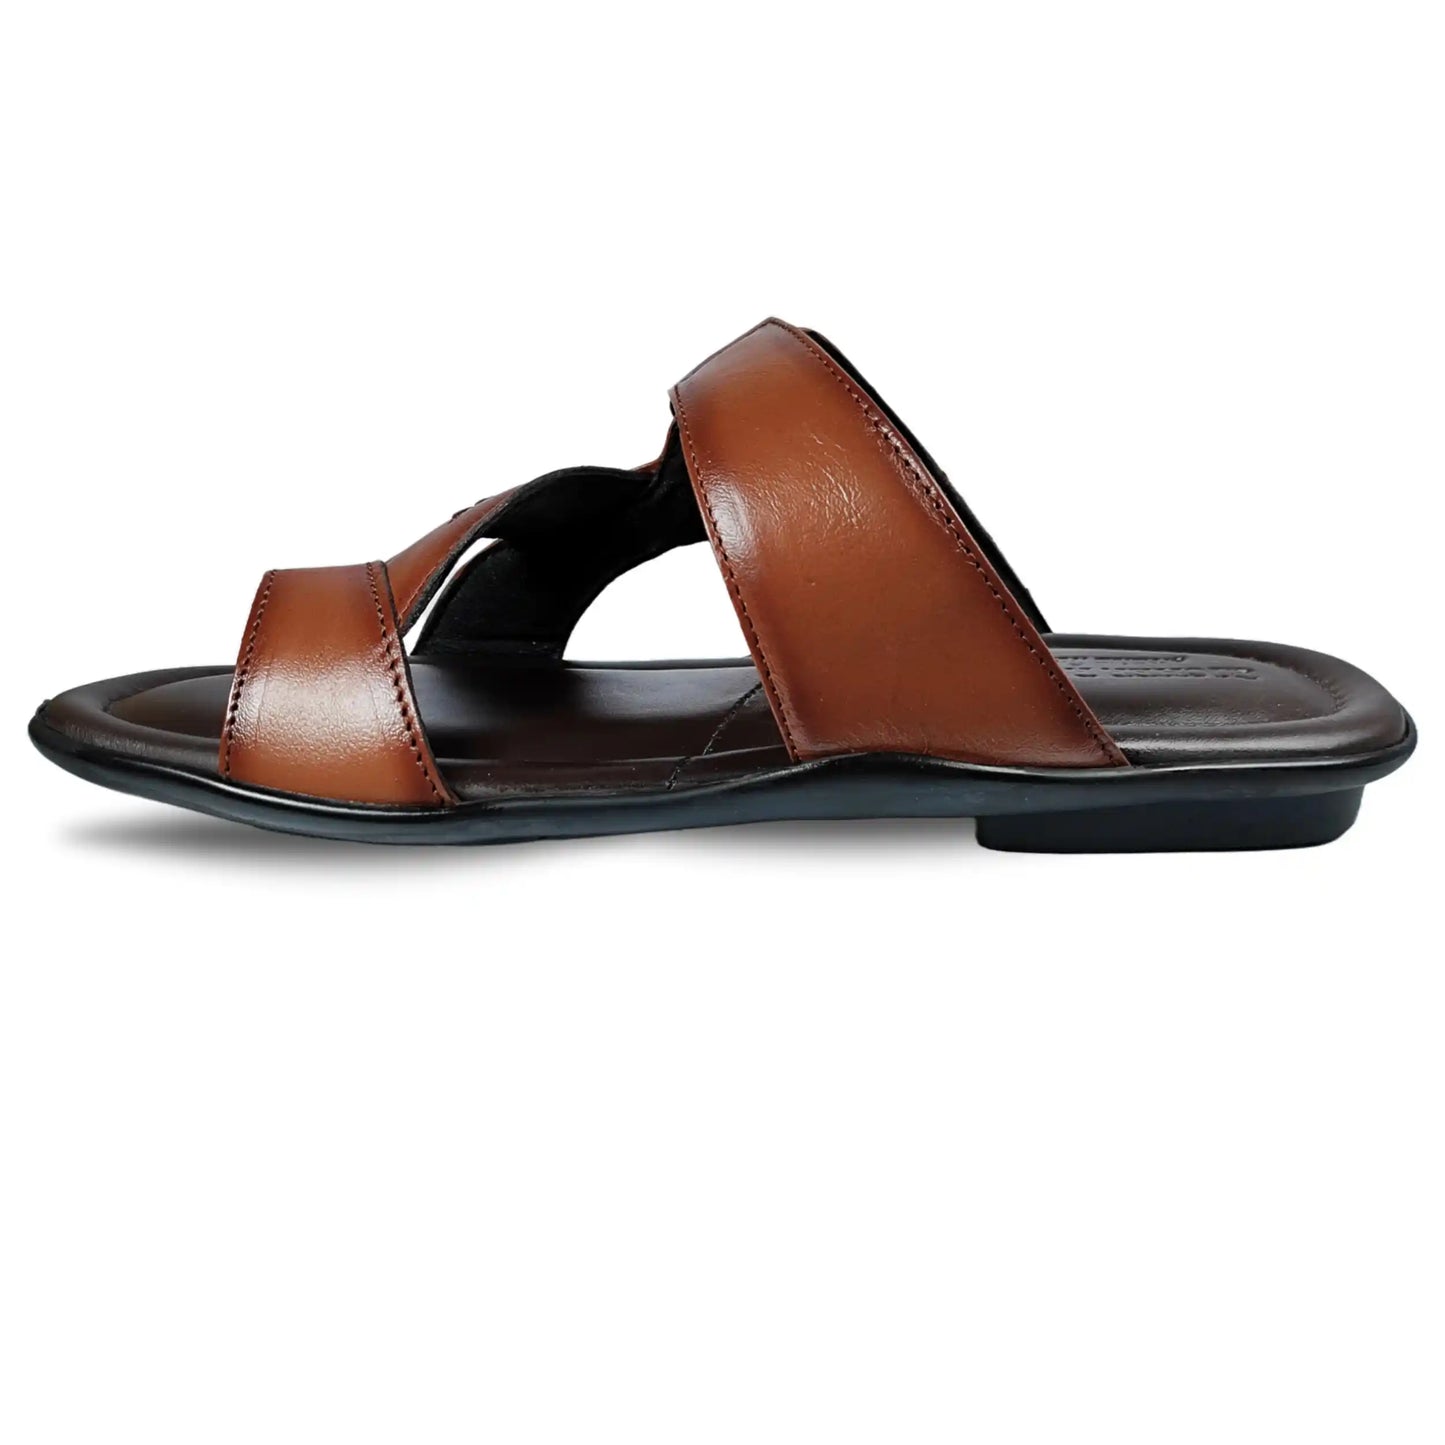 Sandals for Men Pure Leather Slippers